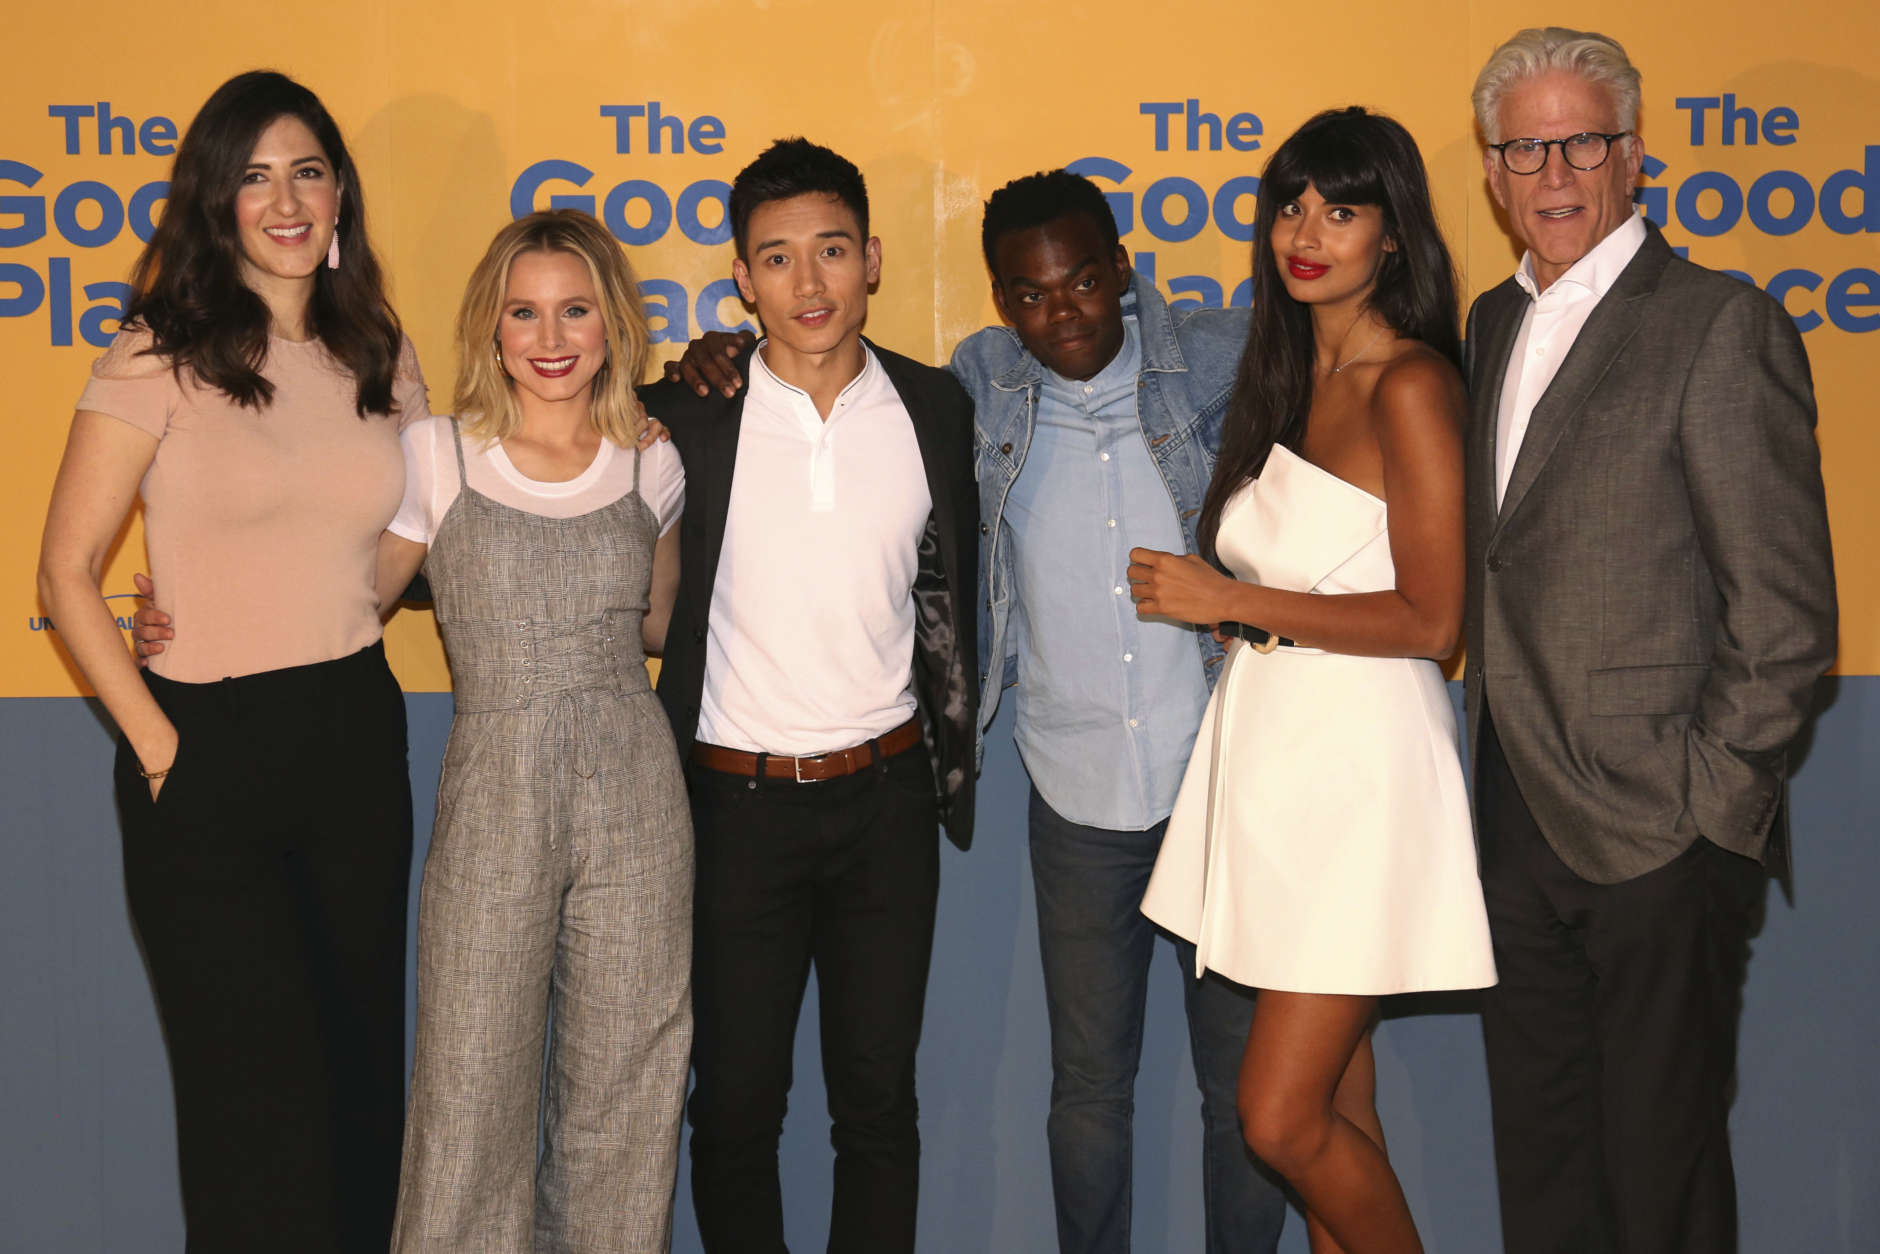 D'Arcy Carden, from left, Kristen Bell, Manny Jacinto, William Jackson Harper, Jameela Jamil and Ted Danson arrive at the "The Good Place" FYC Event on Monday, June 12, 2017, in Los Angeles. (Photo by Willy Sanjuan/Invision/AP)